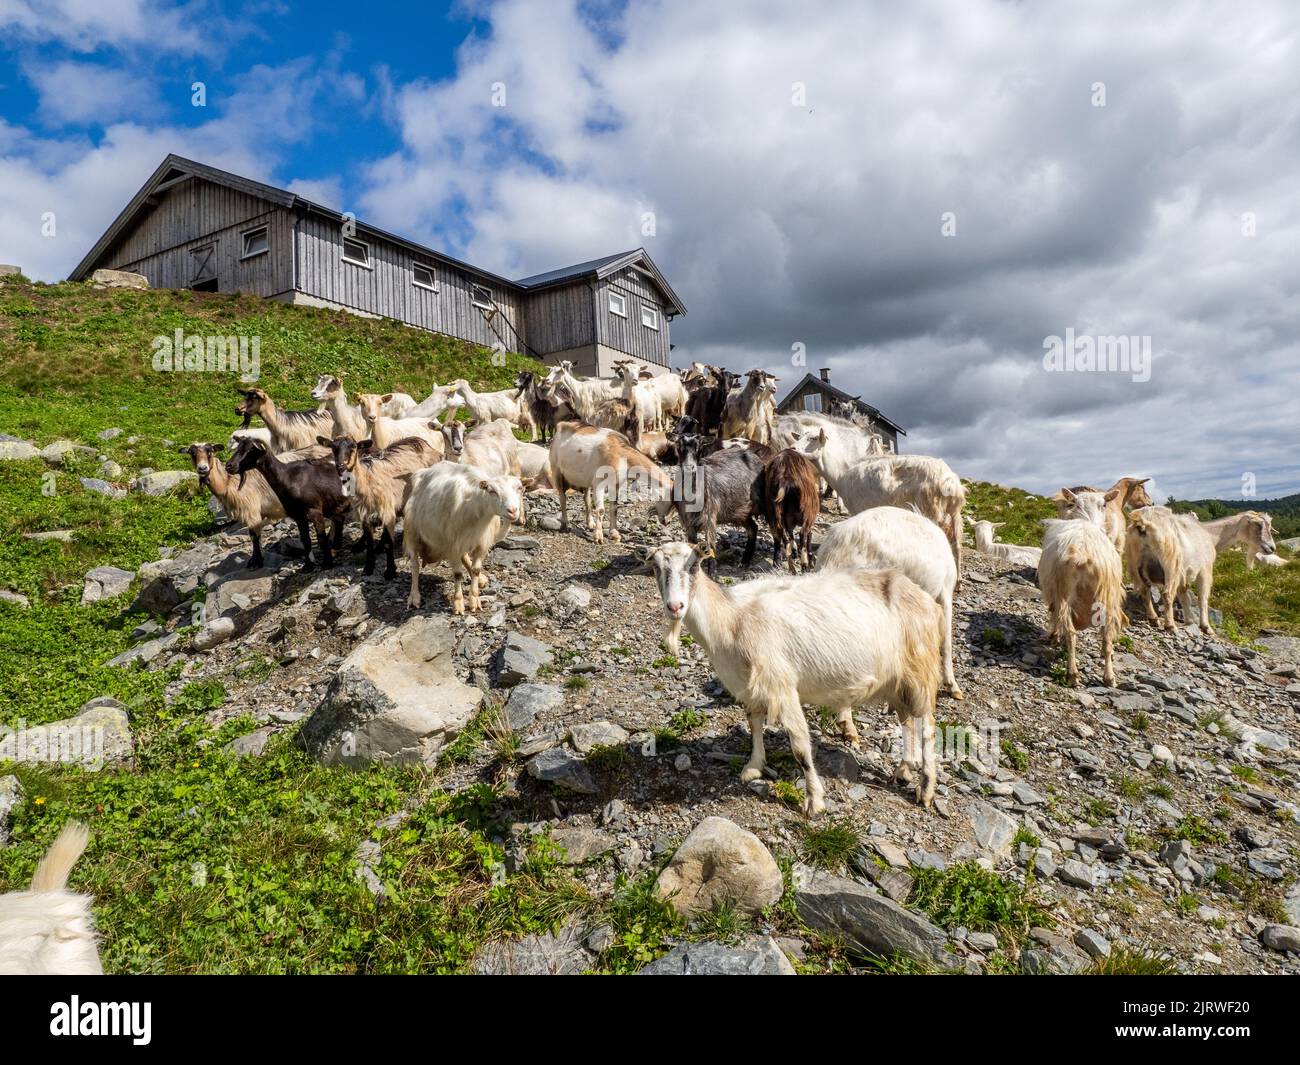 Goat farm producing goat's milk for dairy products in central Norway Stock Photo